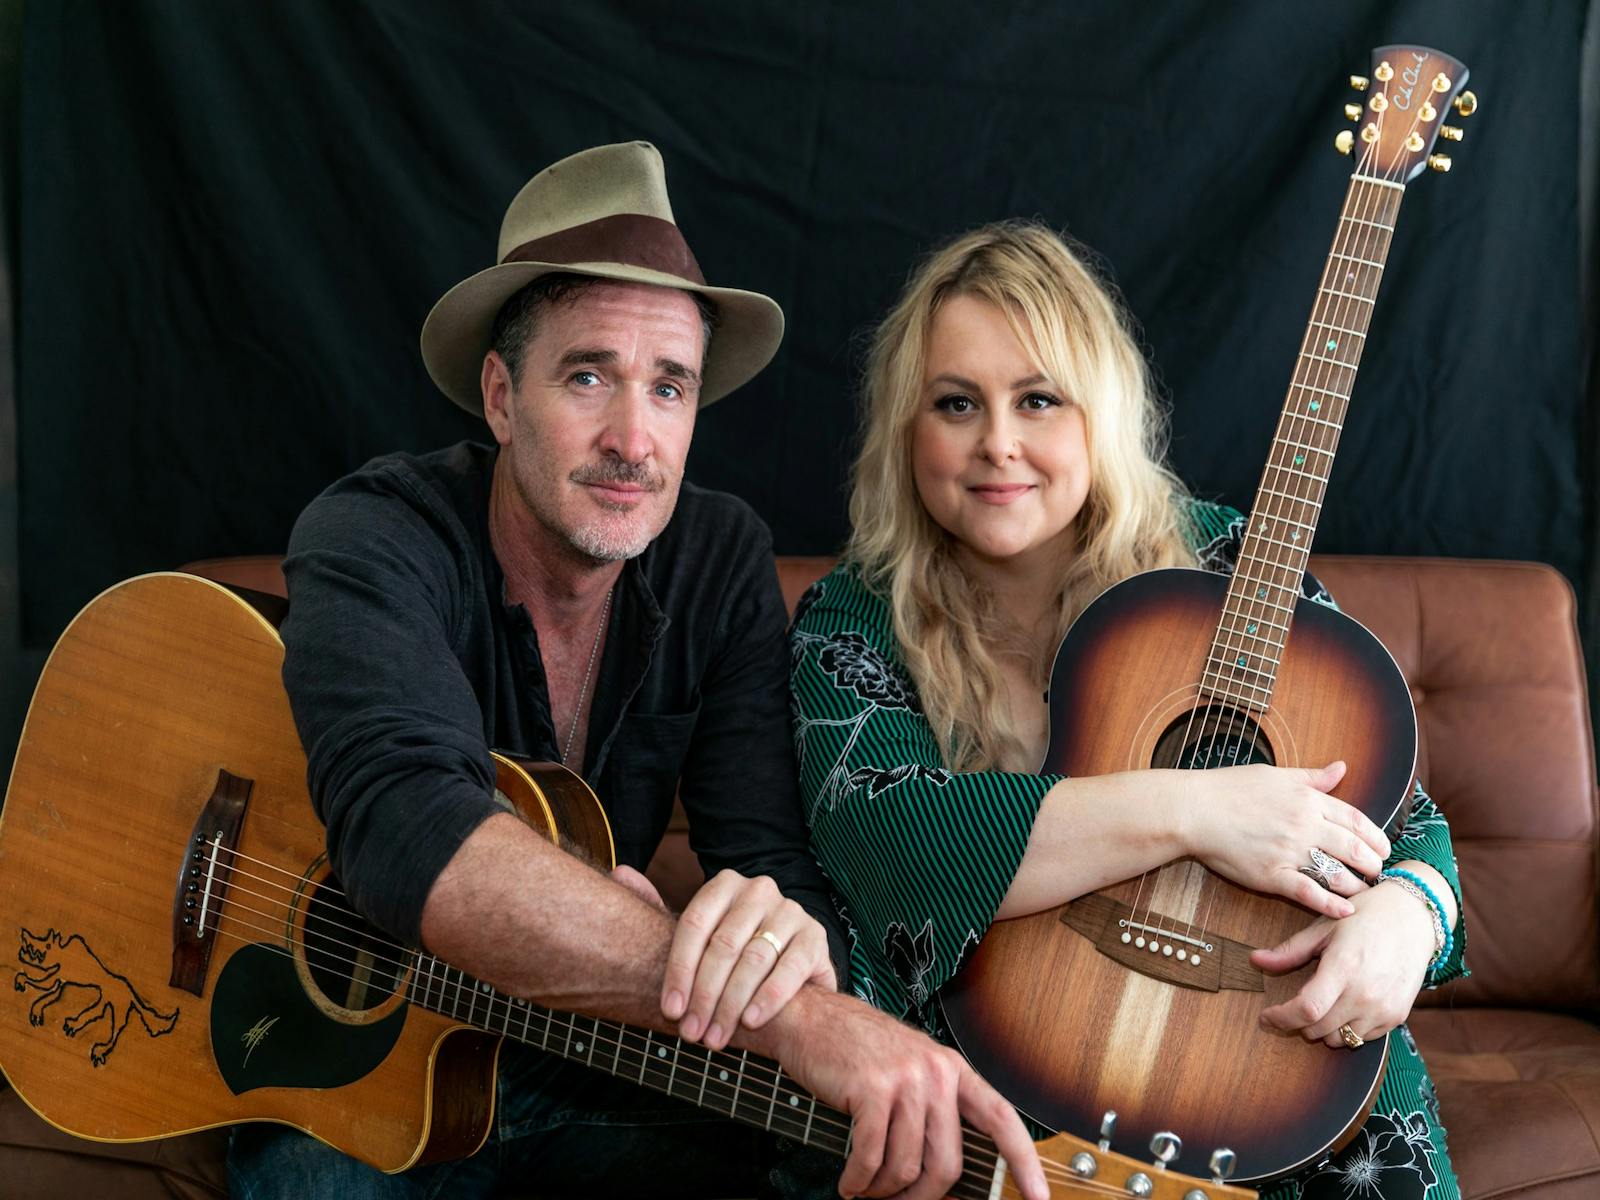 Image for The Barn at Wombat Flat presents: Luke O'Shea and Lyn Bowtell - Love and Laughter Tour